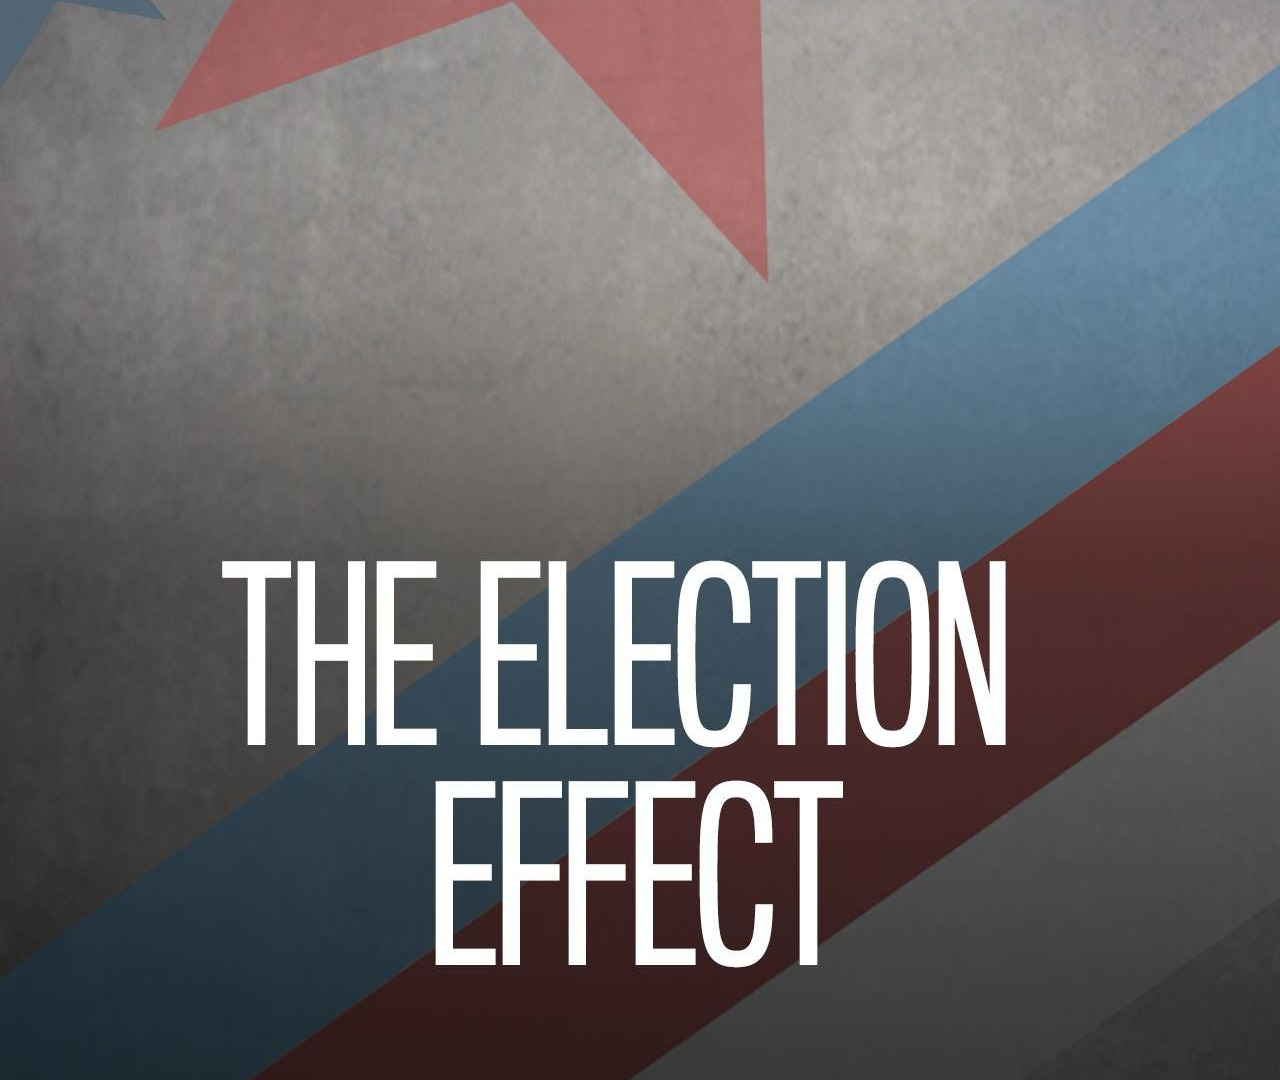 Show The Election Effect